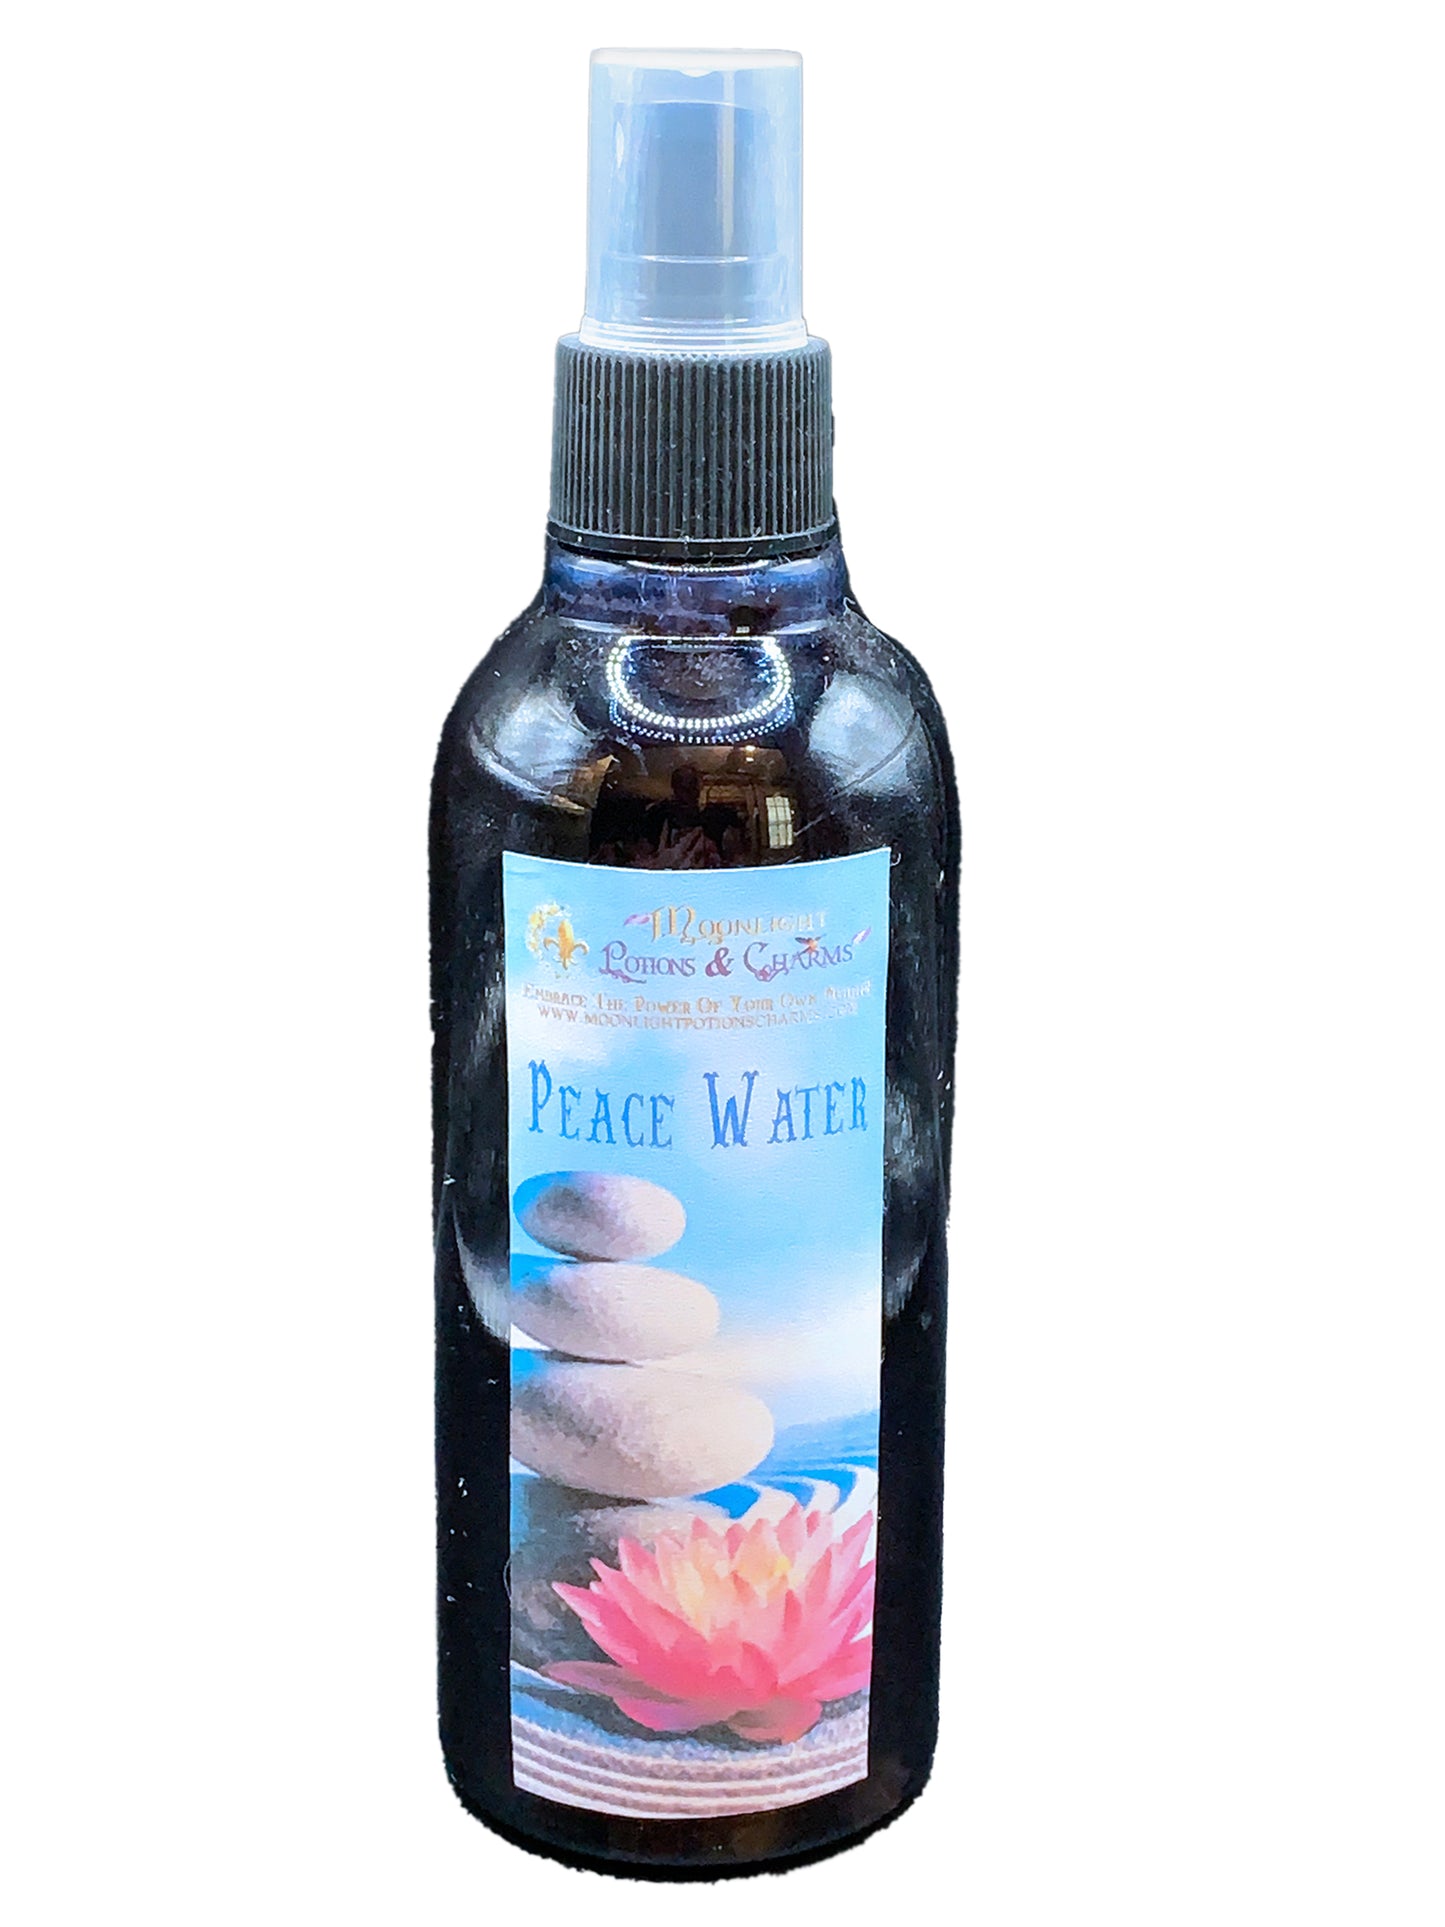 Peace Water Spray 8 oz, Front - Moonlight Potions & Charms